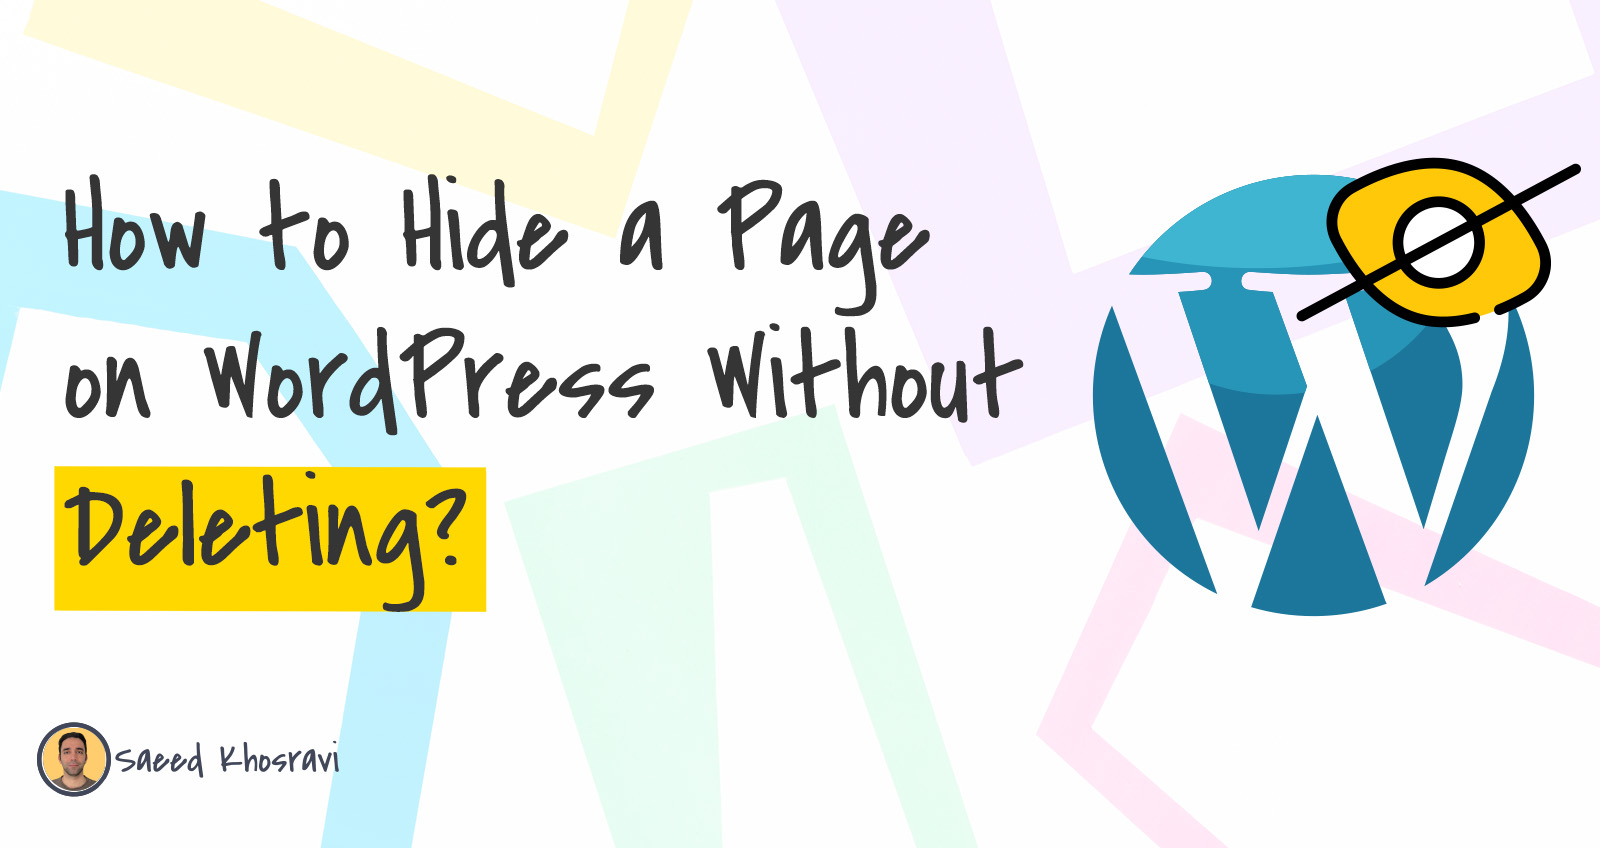 How to Hide a Page on WordPress